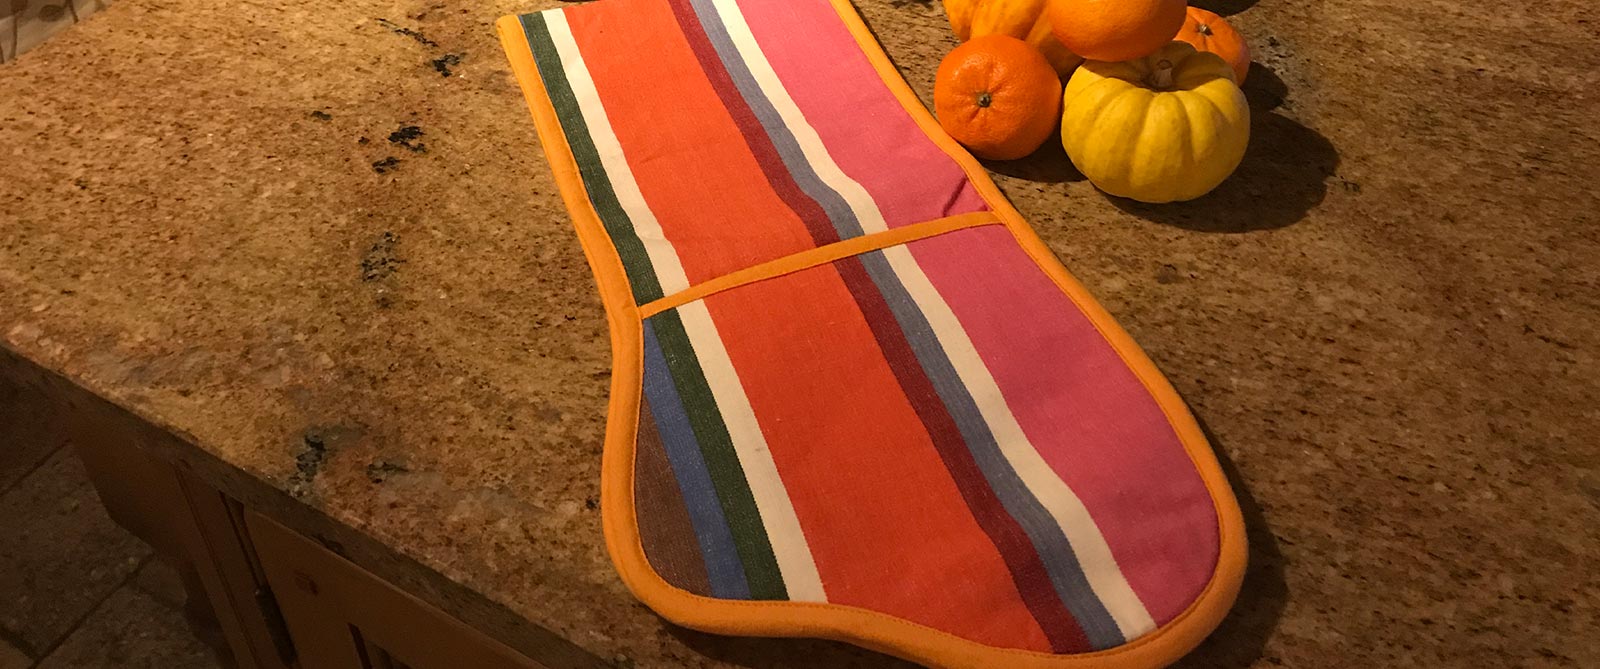 Striped Oven Gloves | Double Oven Mitts